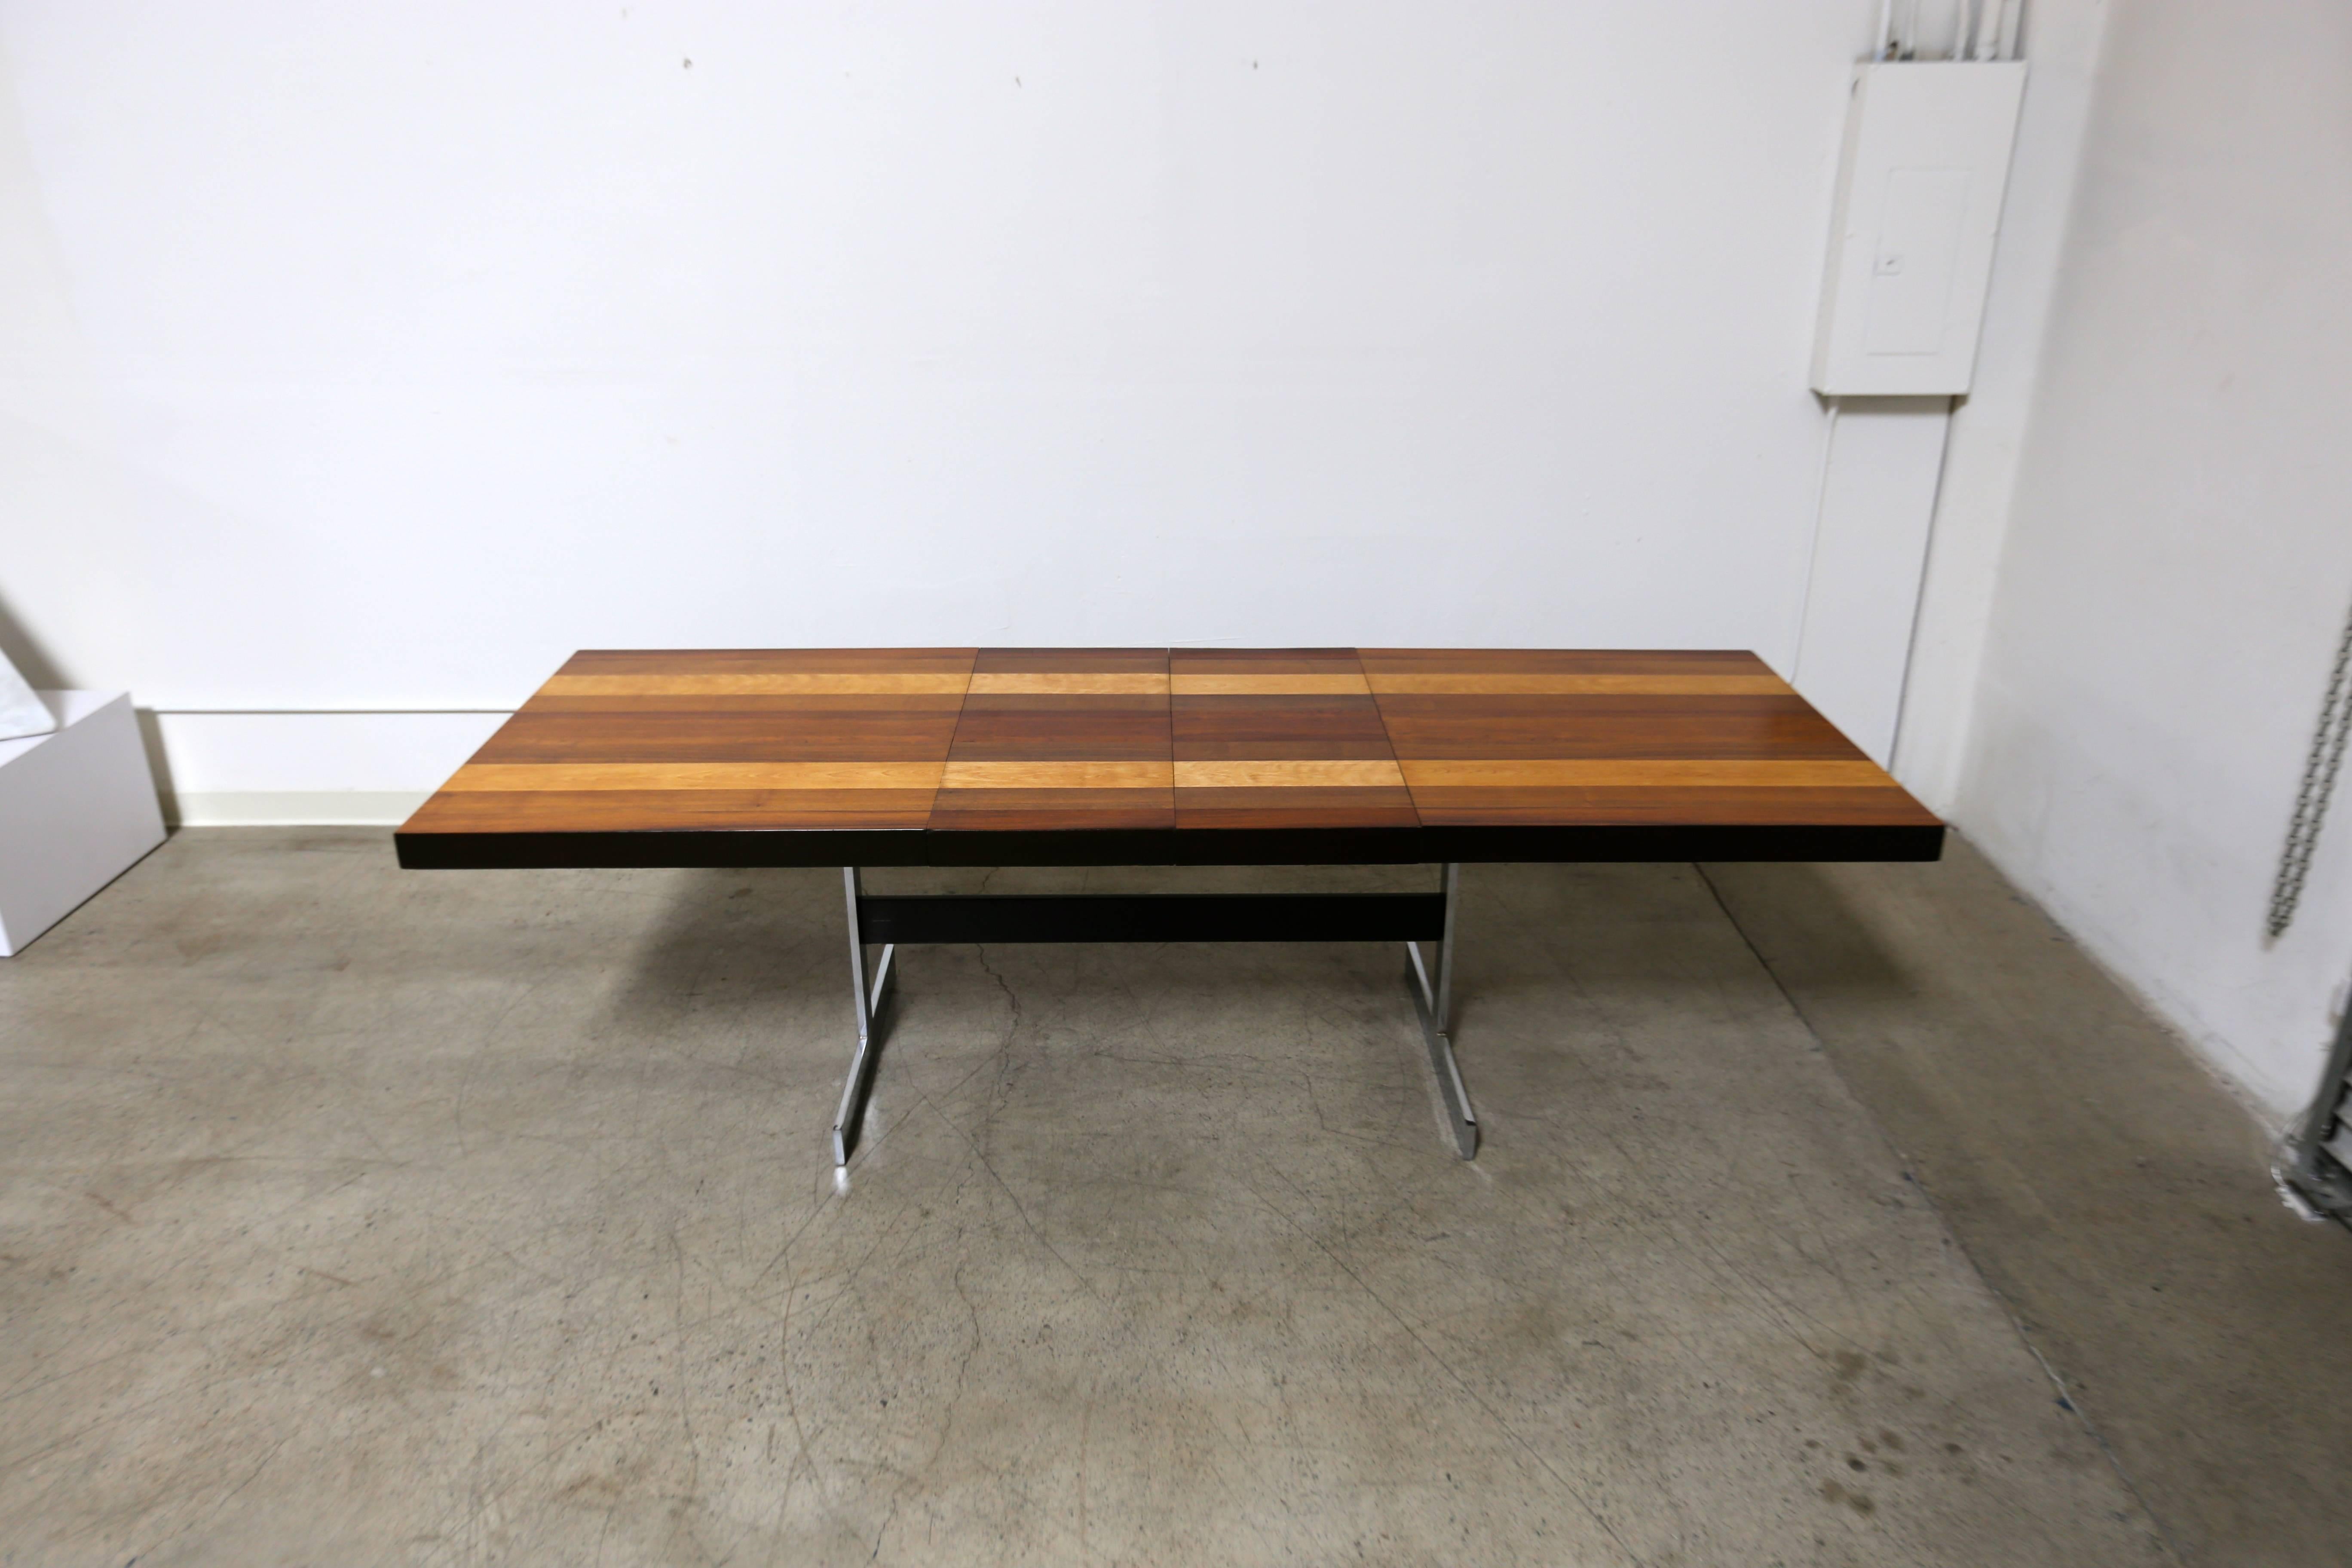 Dining table or desk by Milo Baughman for Thayer Coggin Furniture Company. 

This piece measures 103